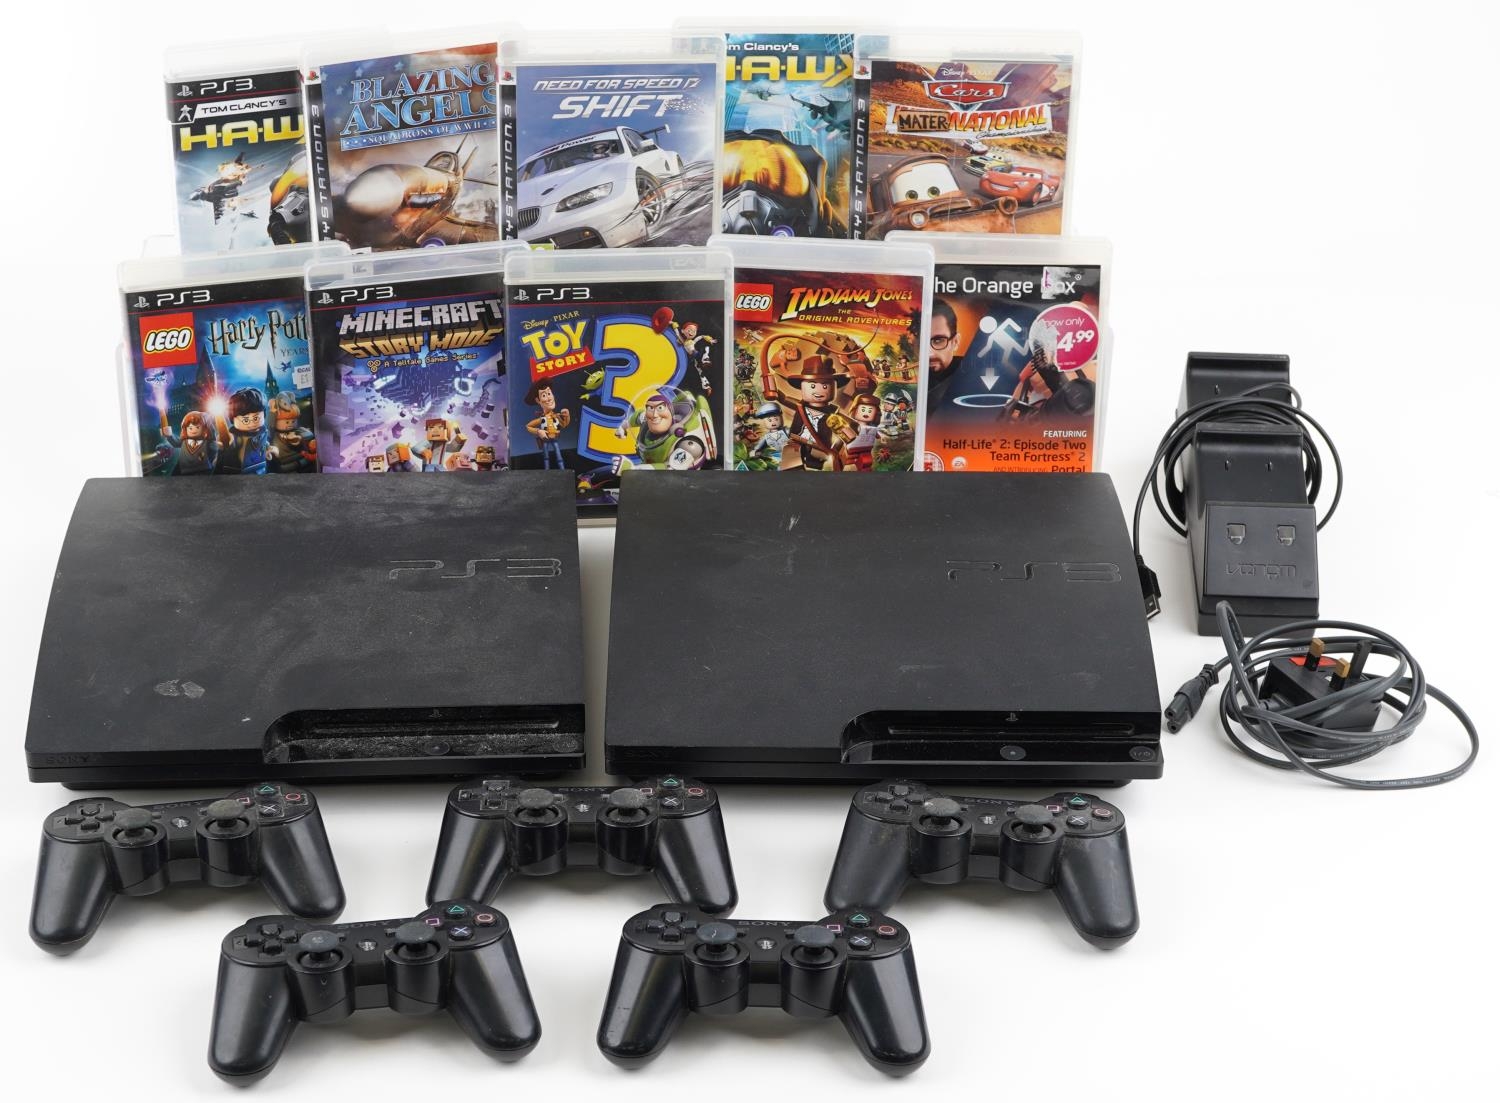 Two Sony PlayStation 3 games consoles with five controllers, docking station and games including Tom